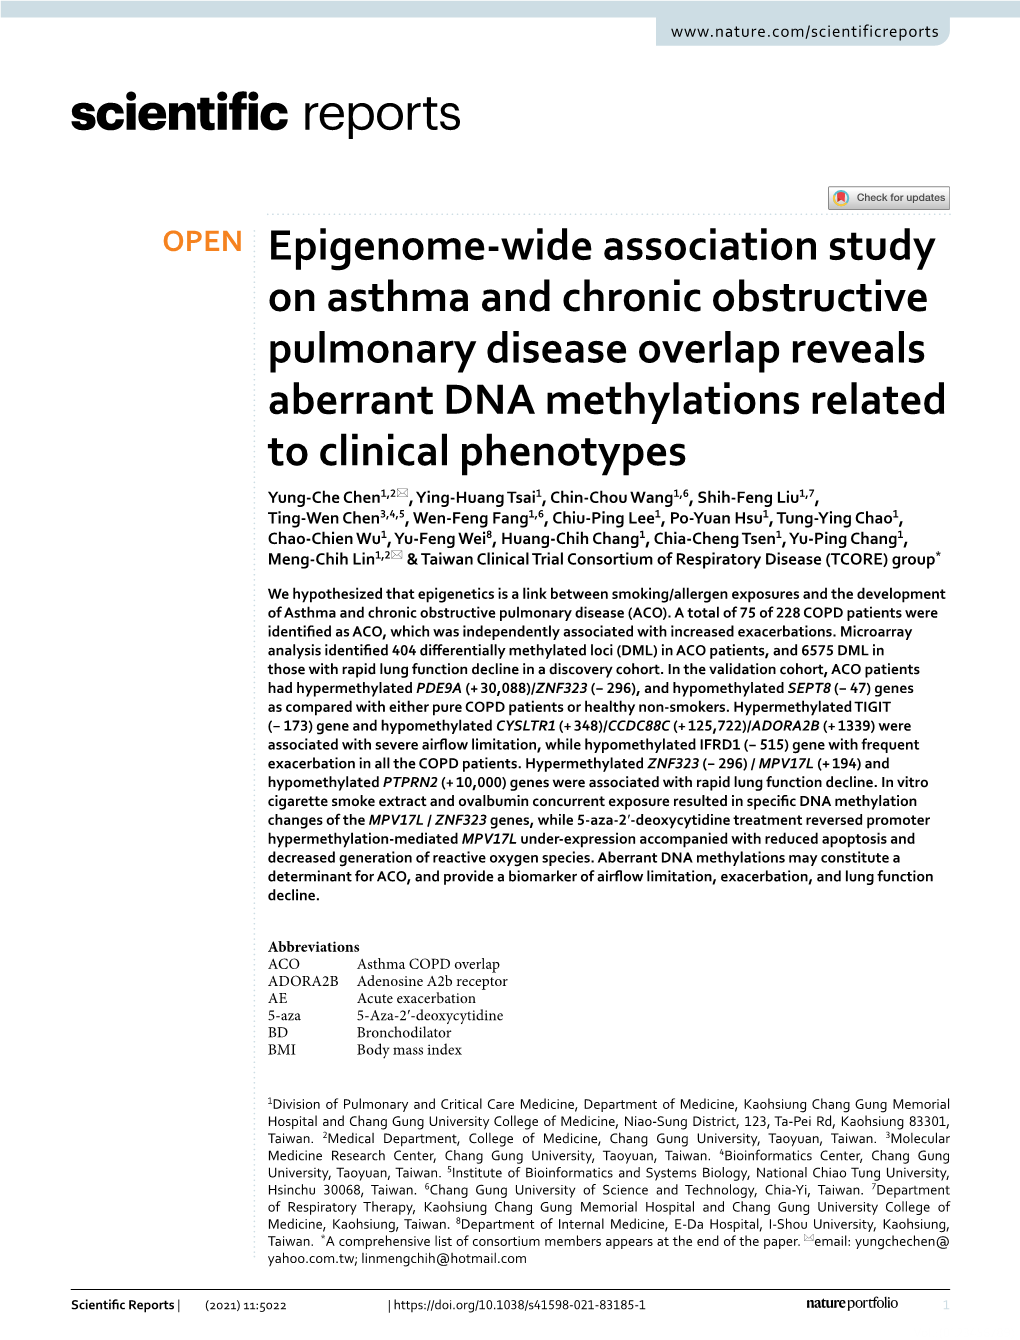 Epigenome-Wide Association Study on Asthma and Chronic Obstructive